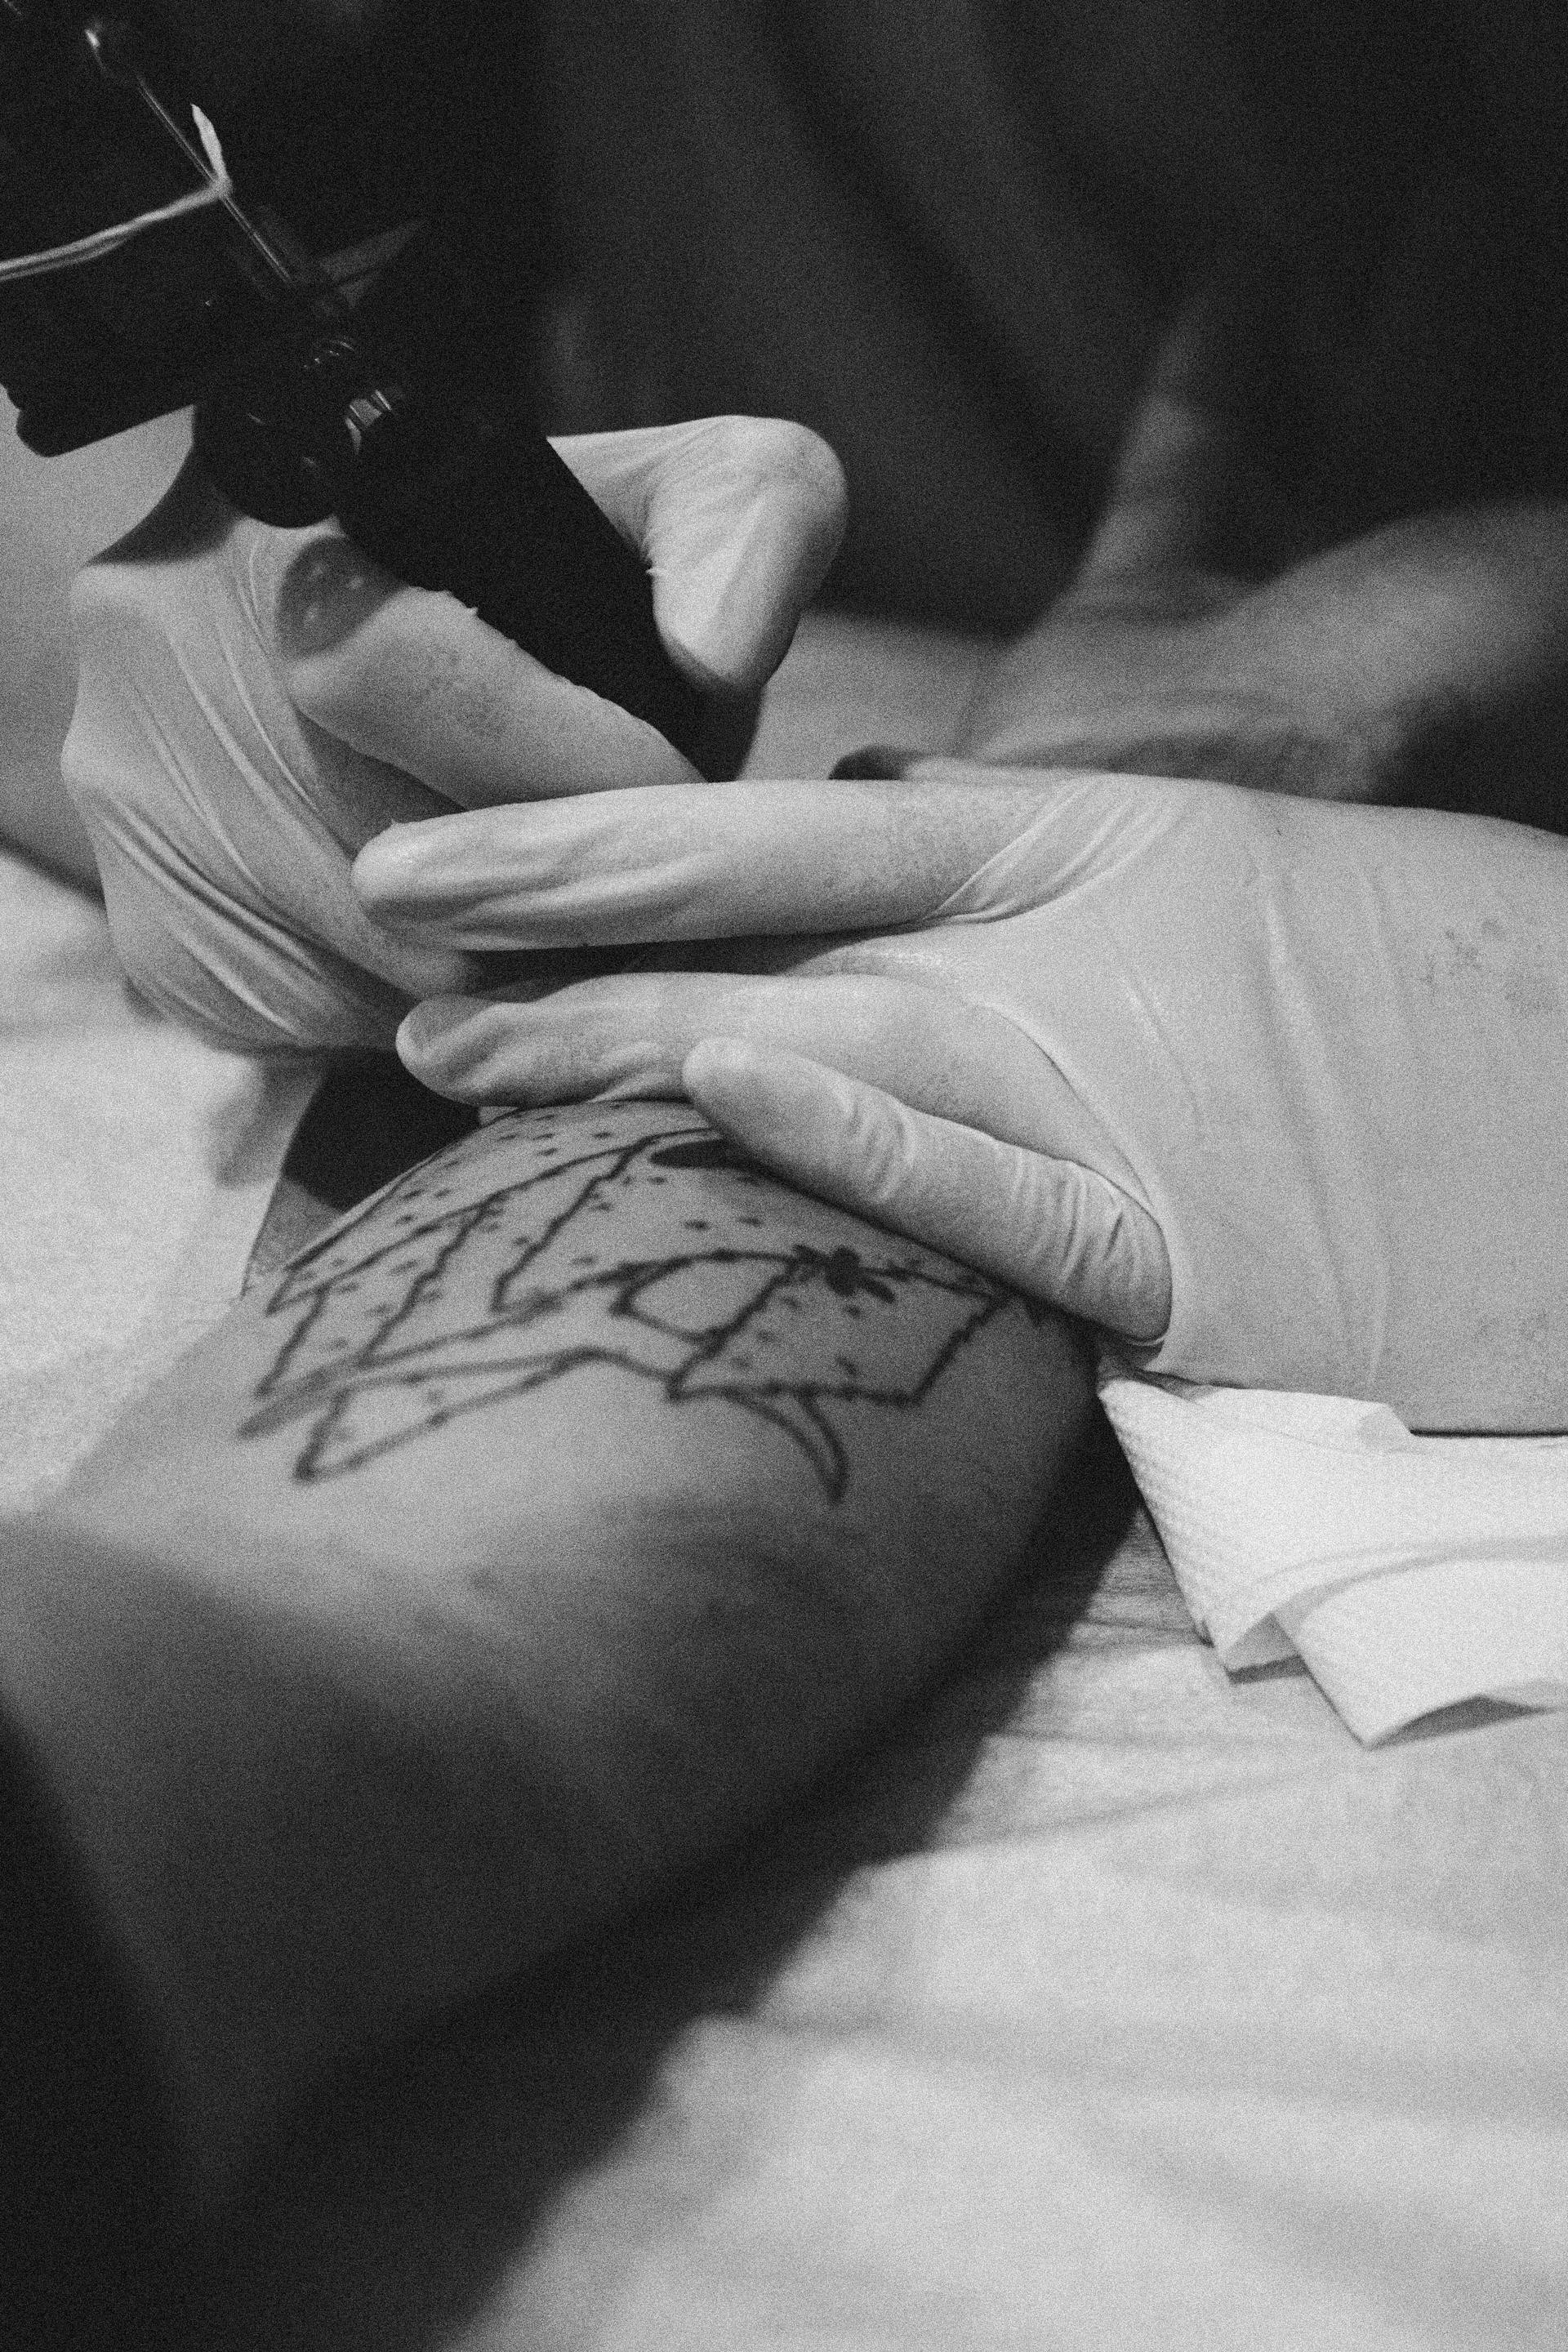 A person getting a tattoo | Source: Pexels